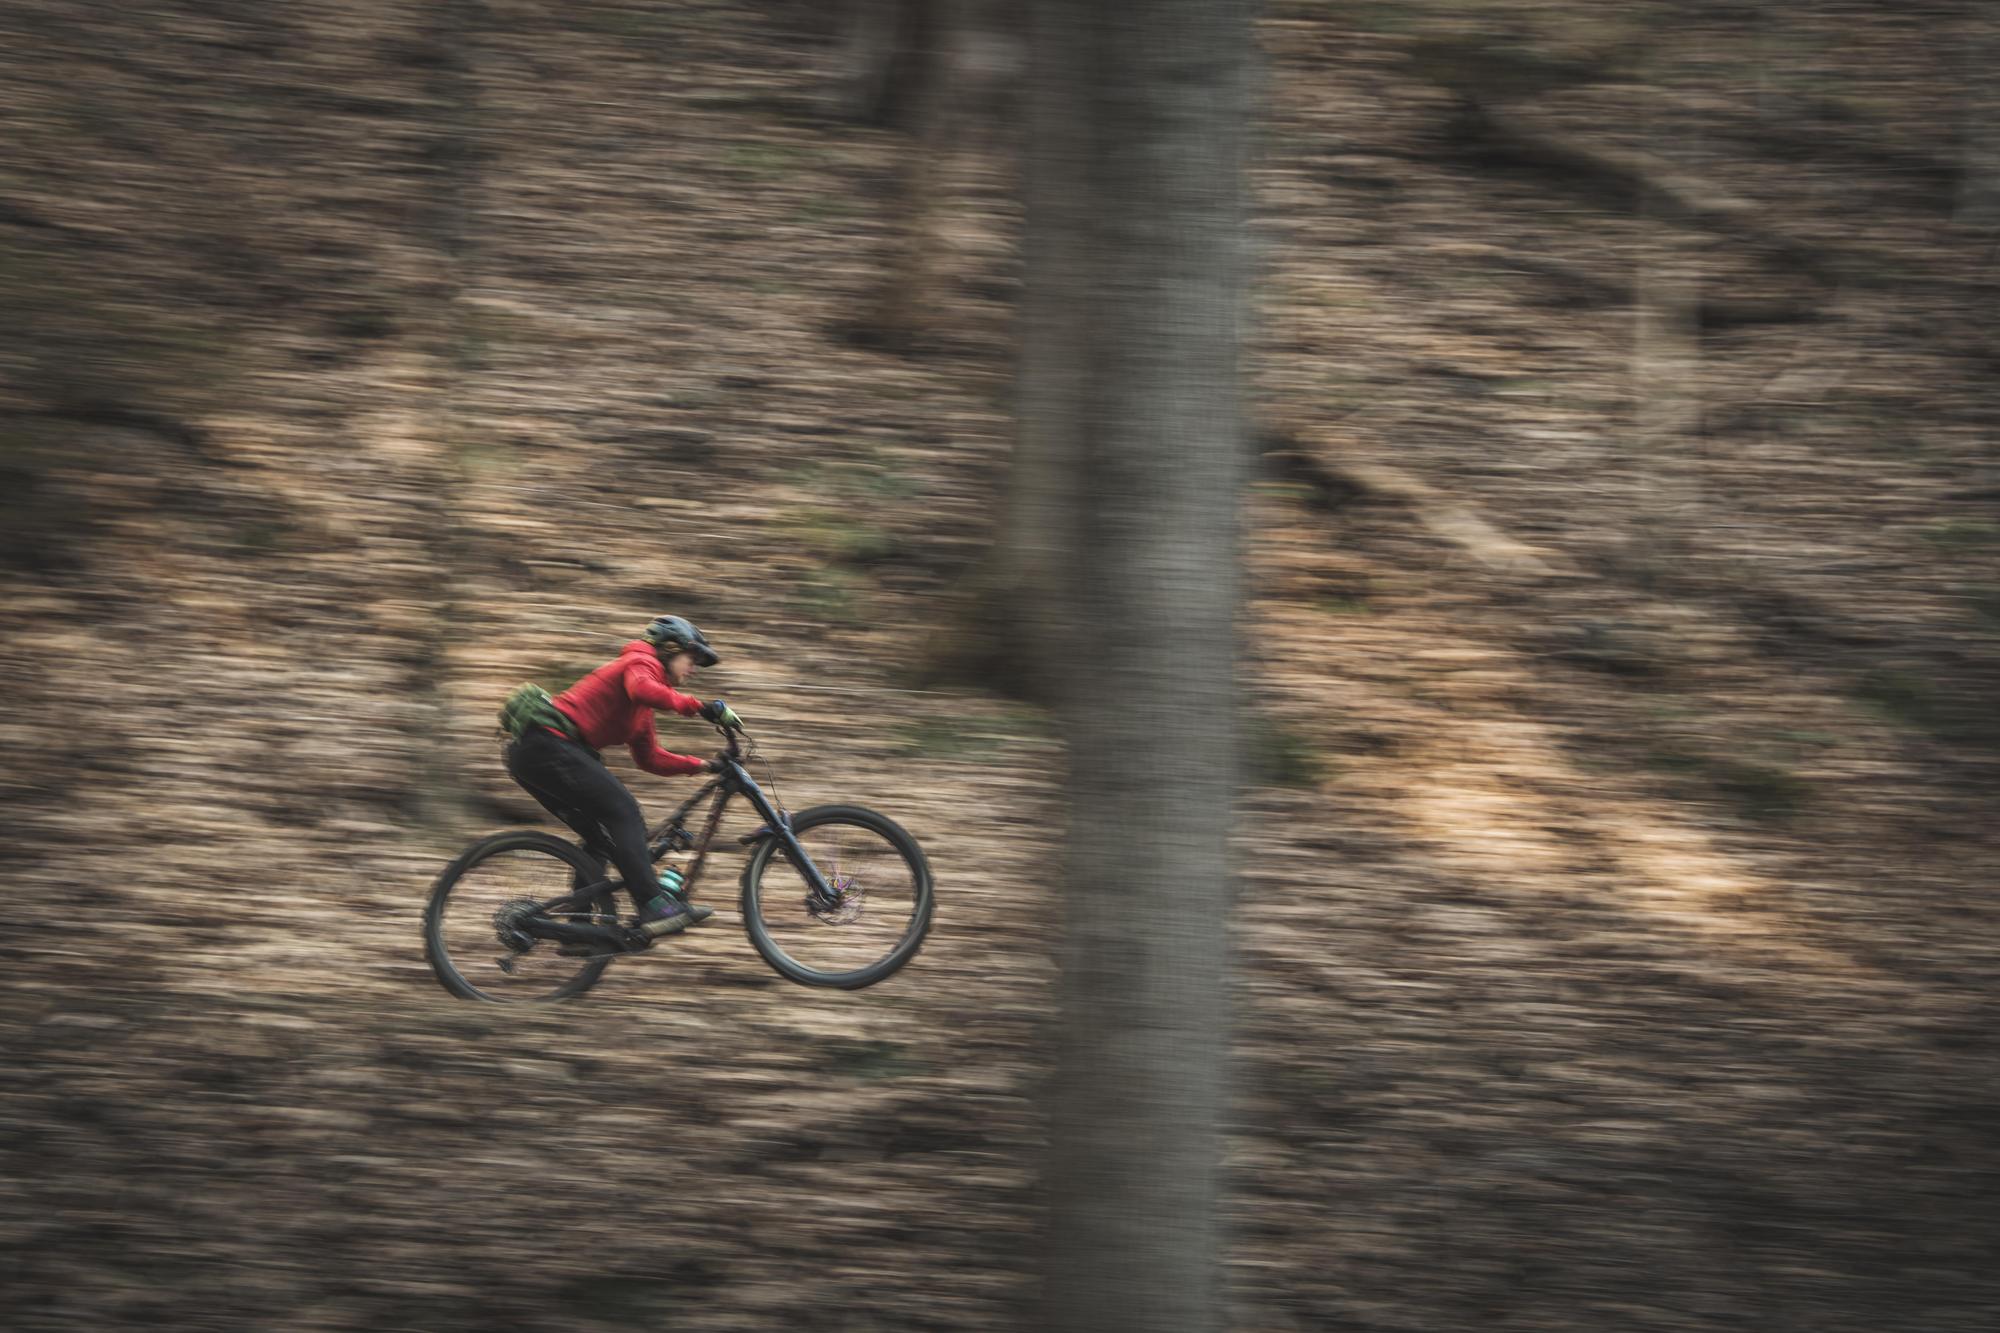 Mountain biking in the Pisgah National Forest